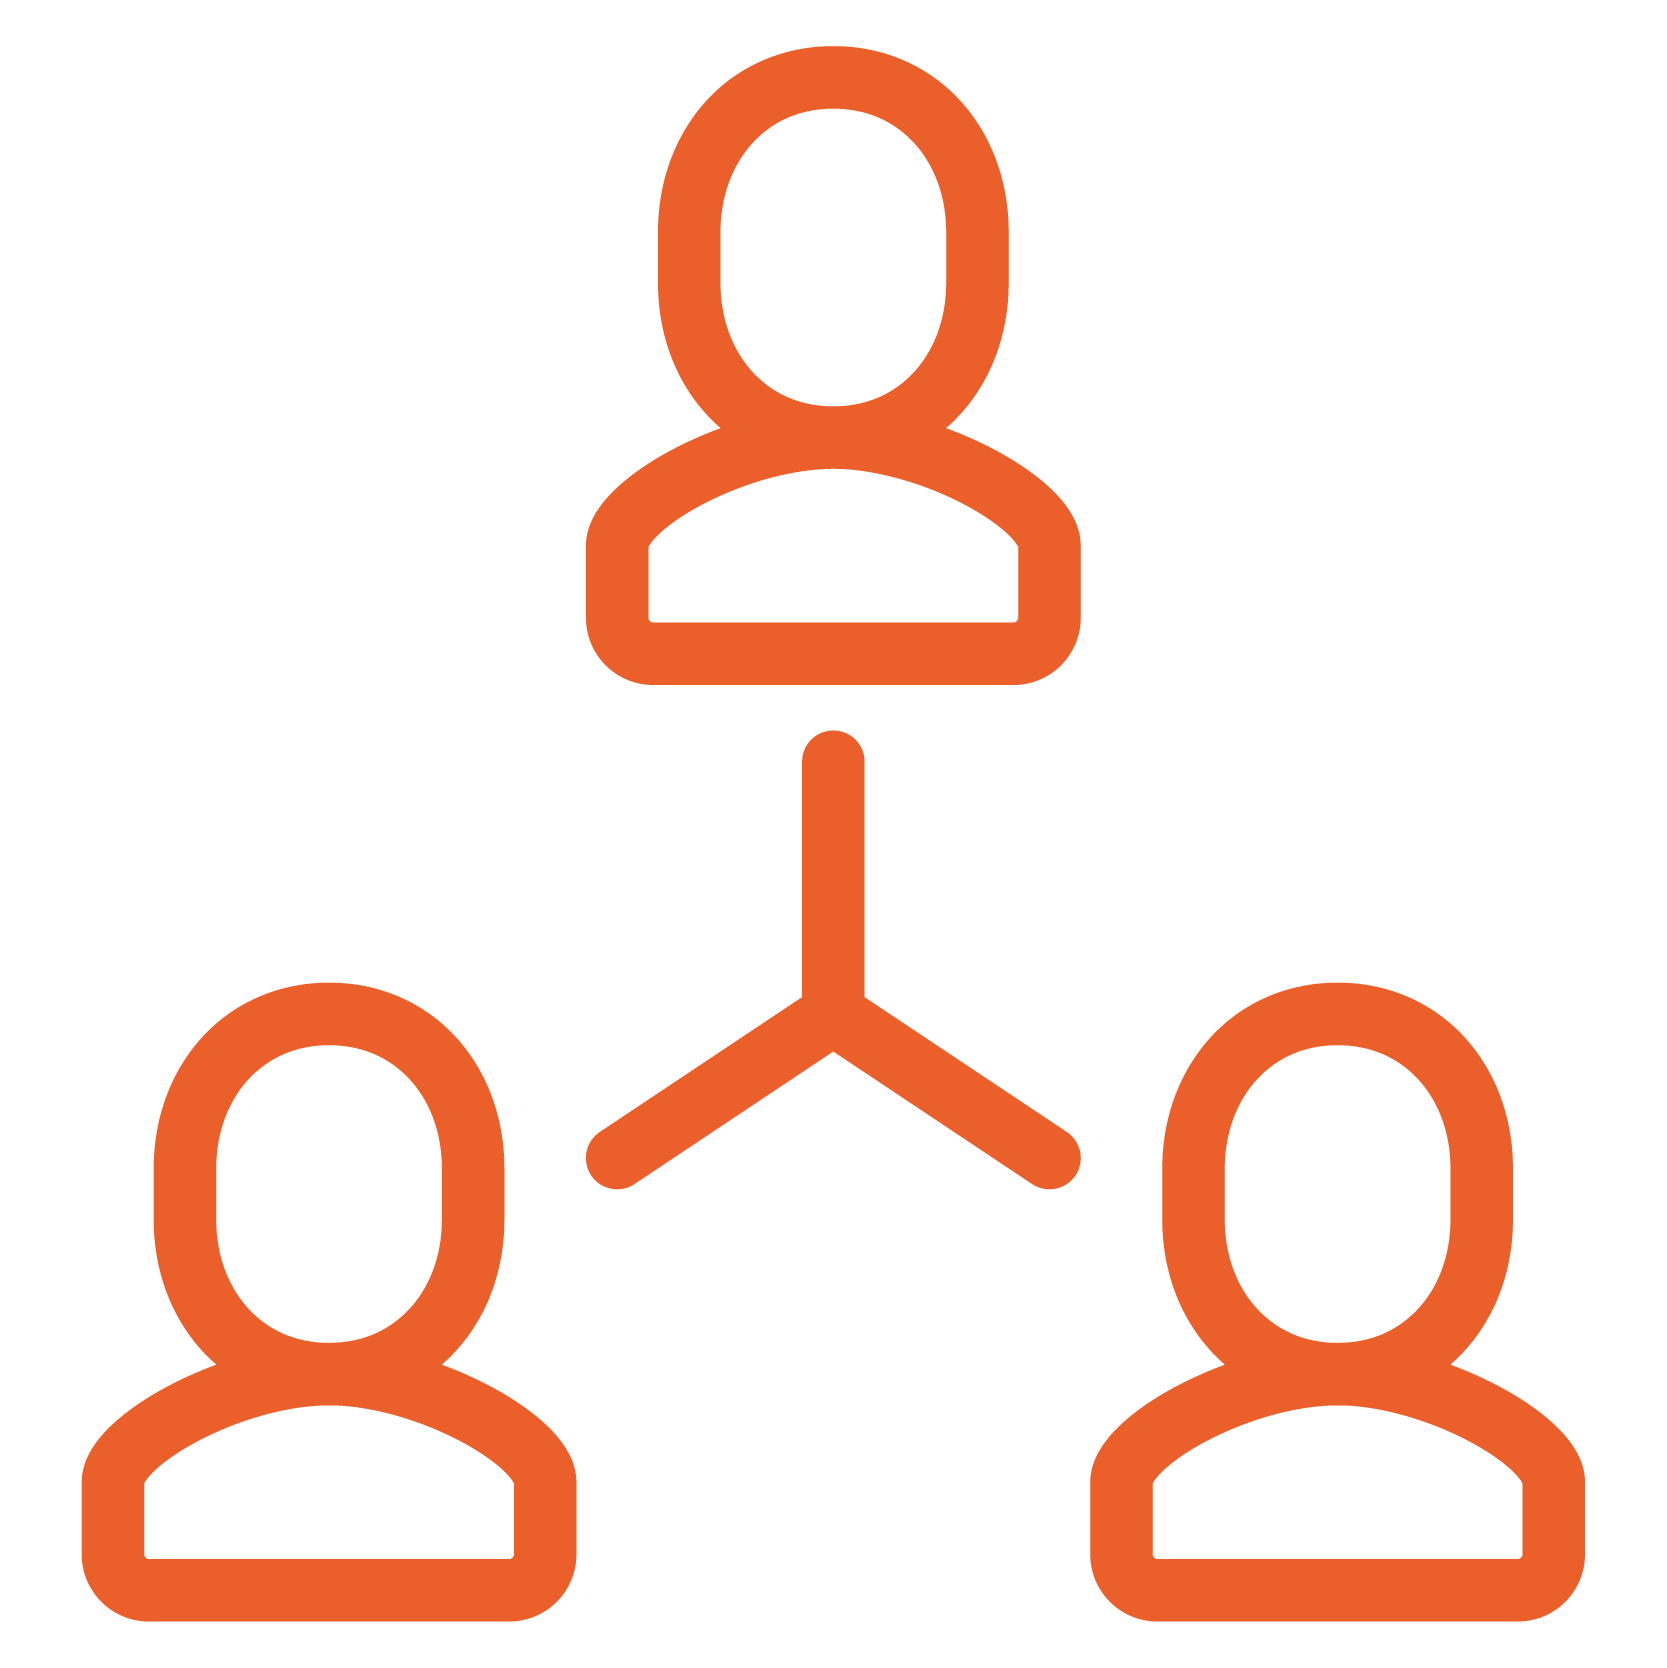 orange icon showing three people connected in an org chart structure